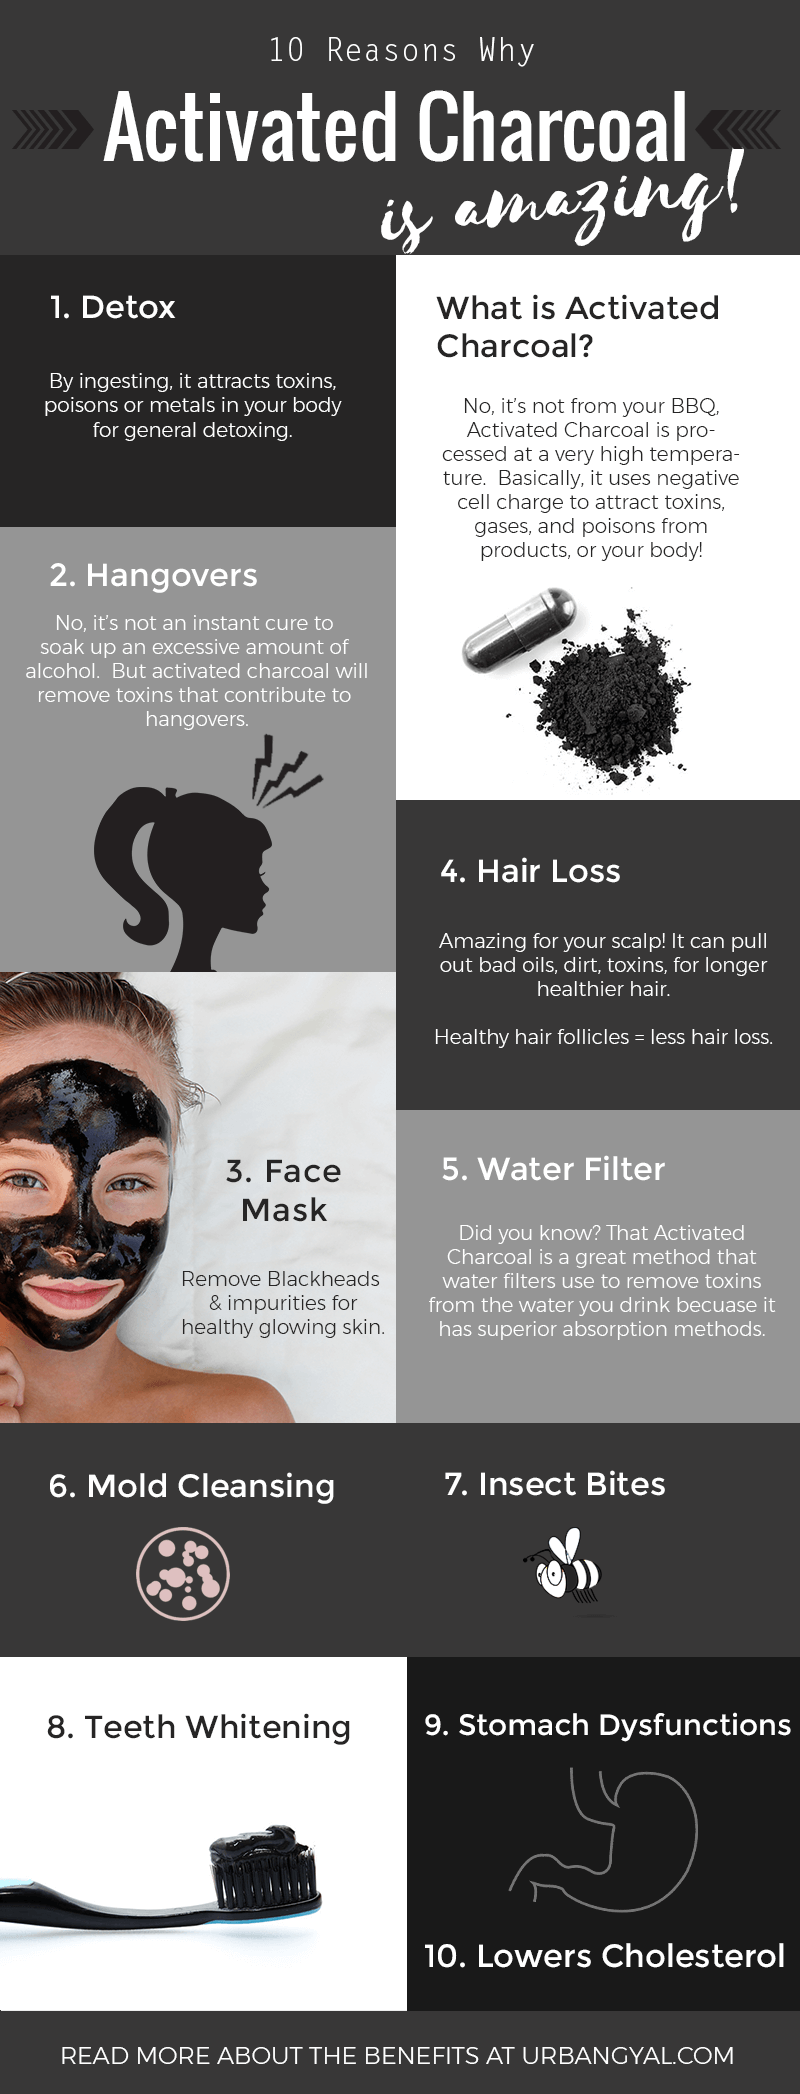 Activated Charcoal Benefits Infographic